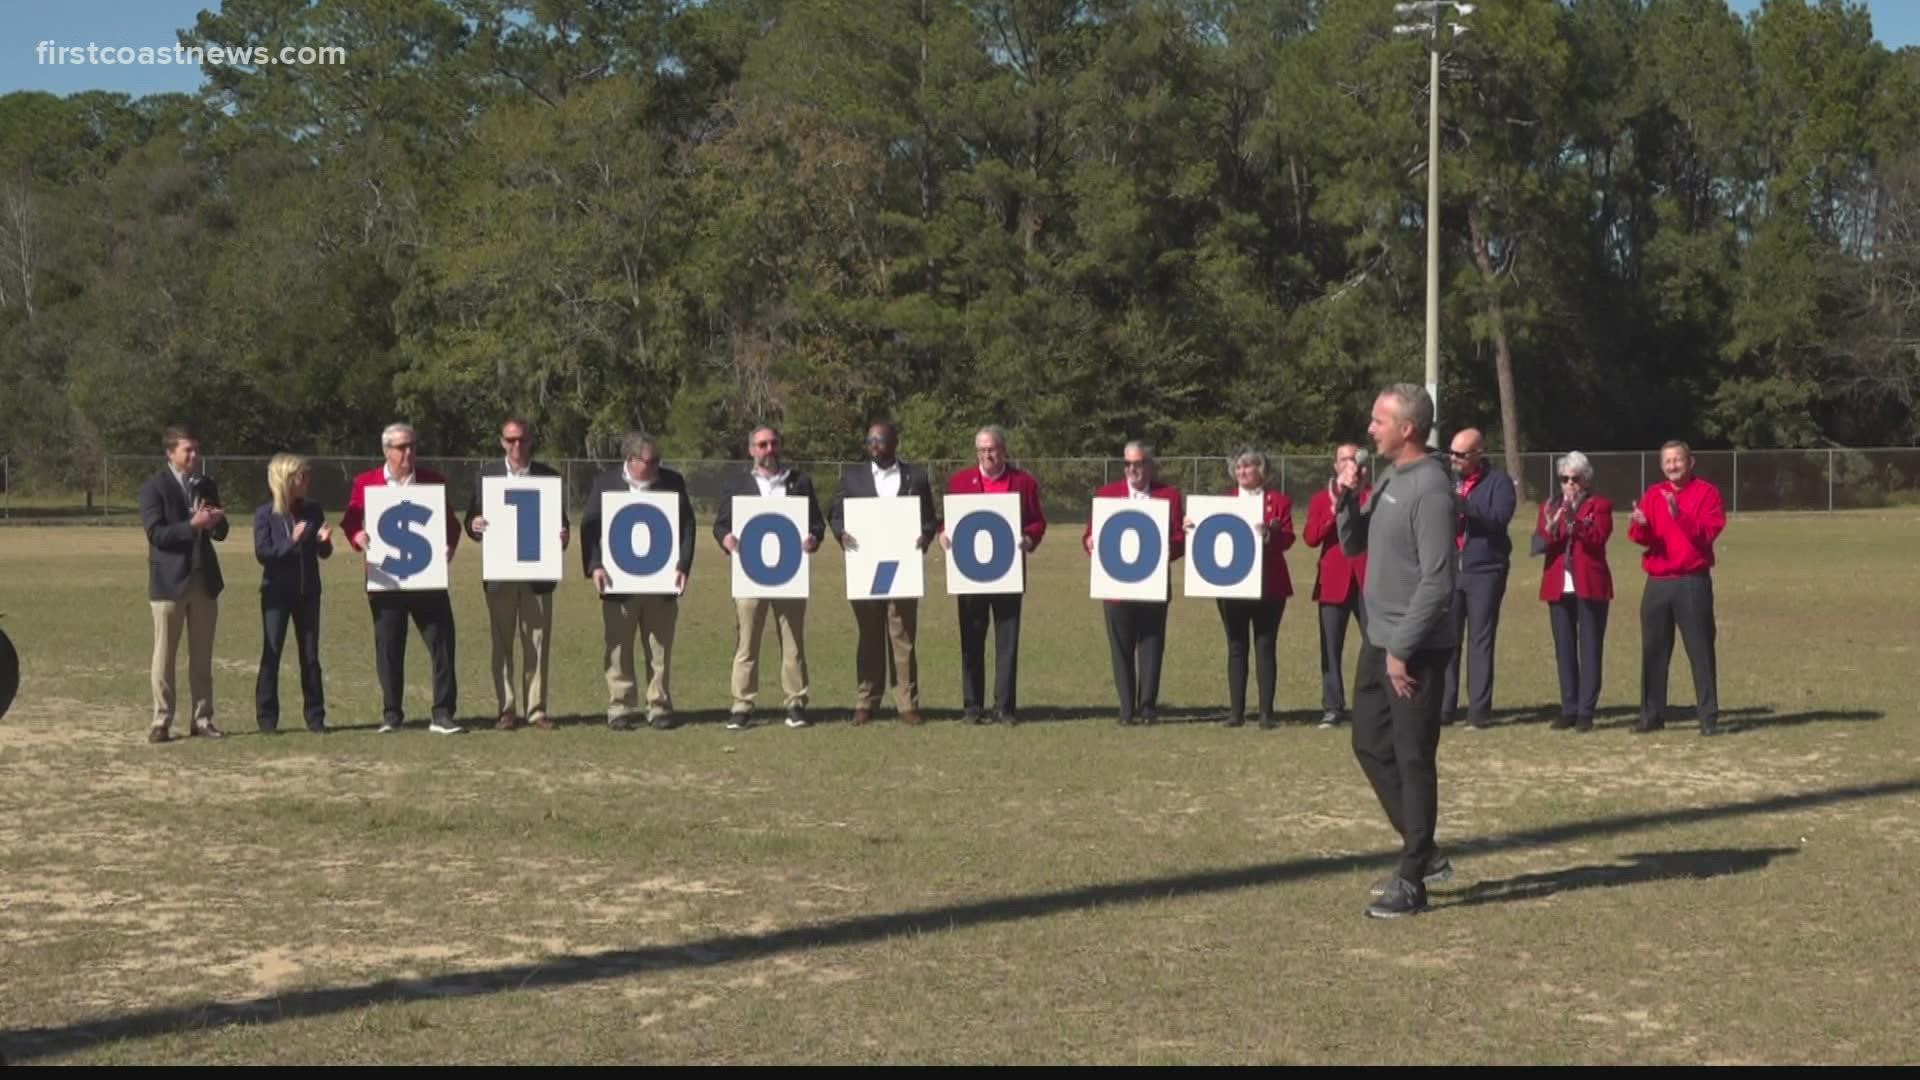 The $100,000 donation will include a state of the art putting green inspired by the City of Jacksonville.